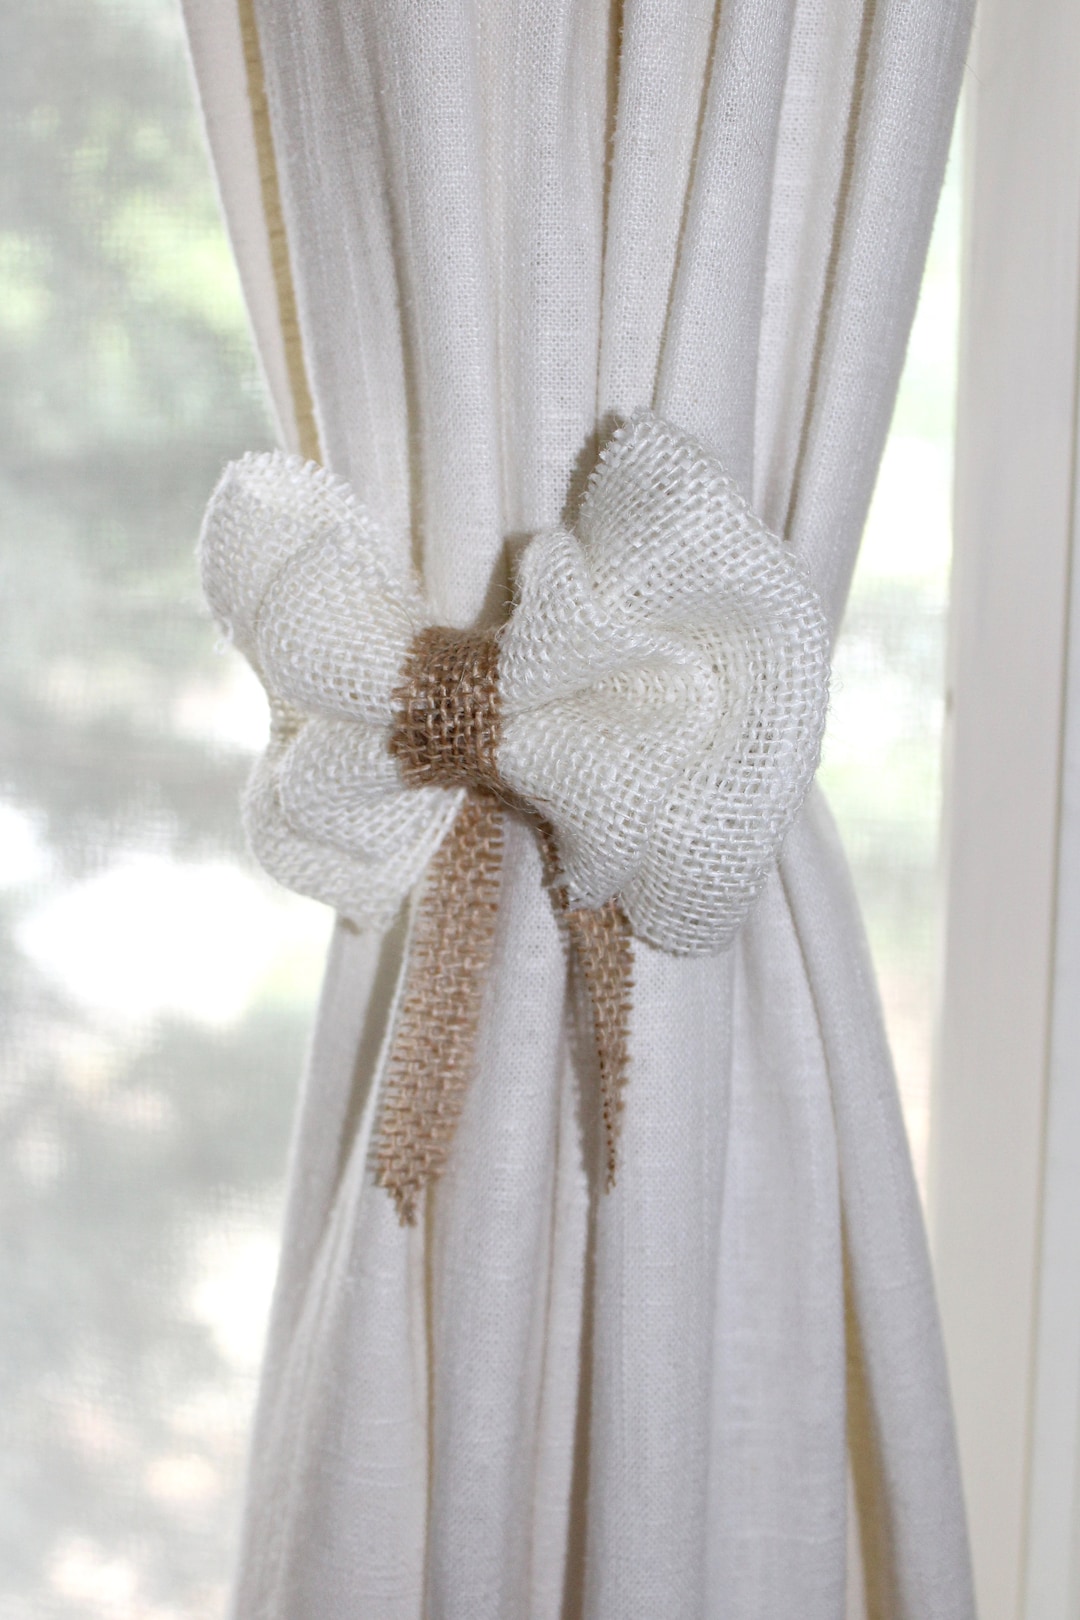 Rustic Burlap Bow in Natural and Ivory Color Curtain Tie Back - Etsy